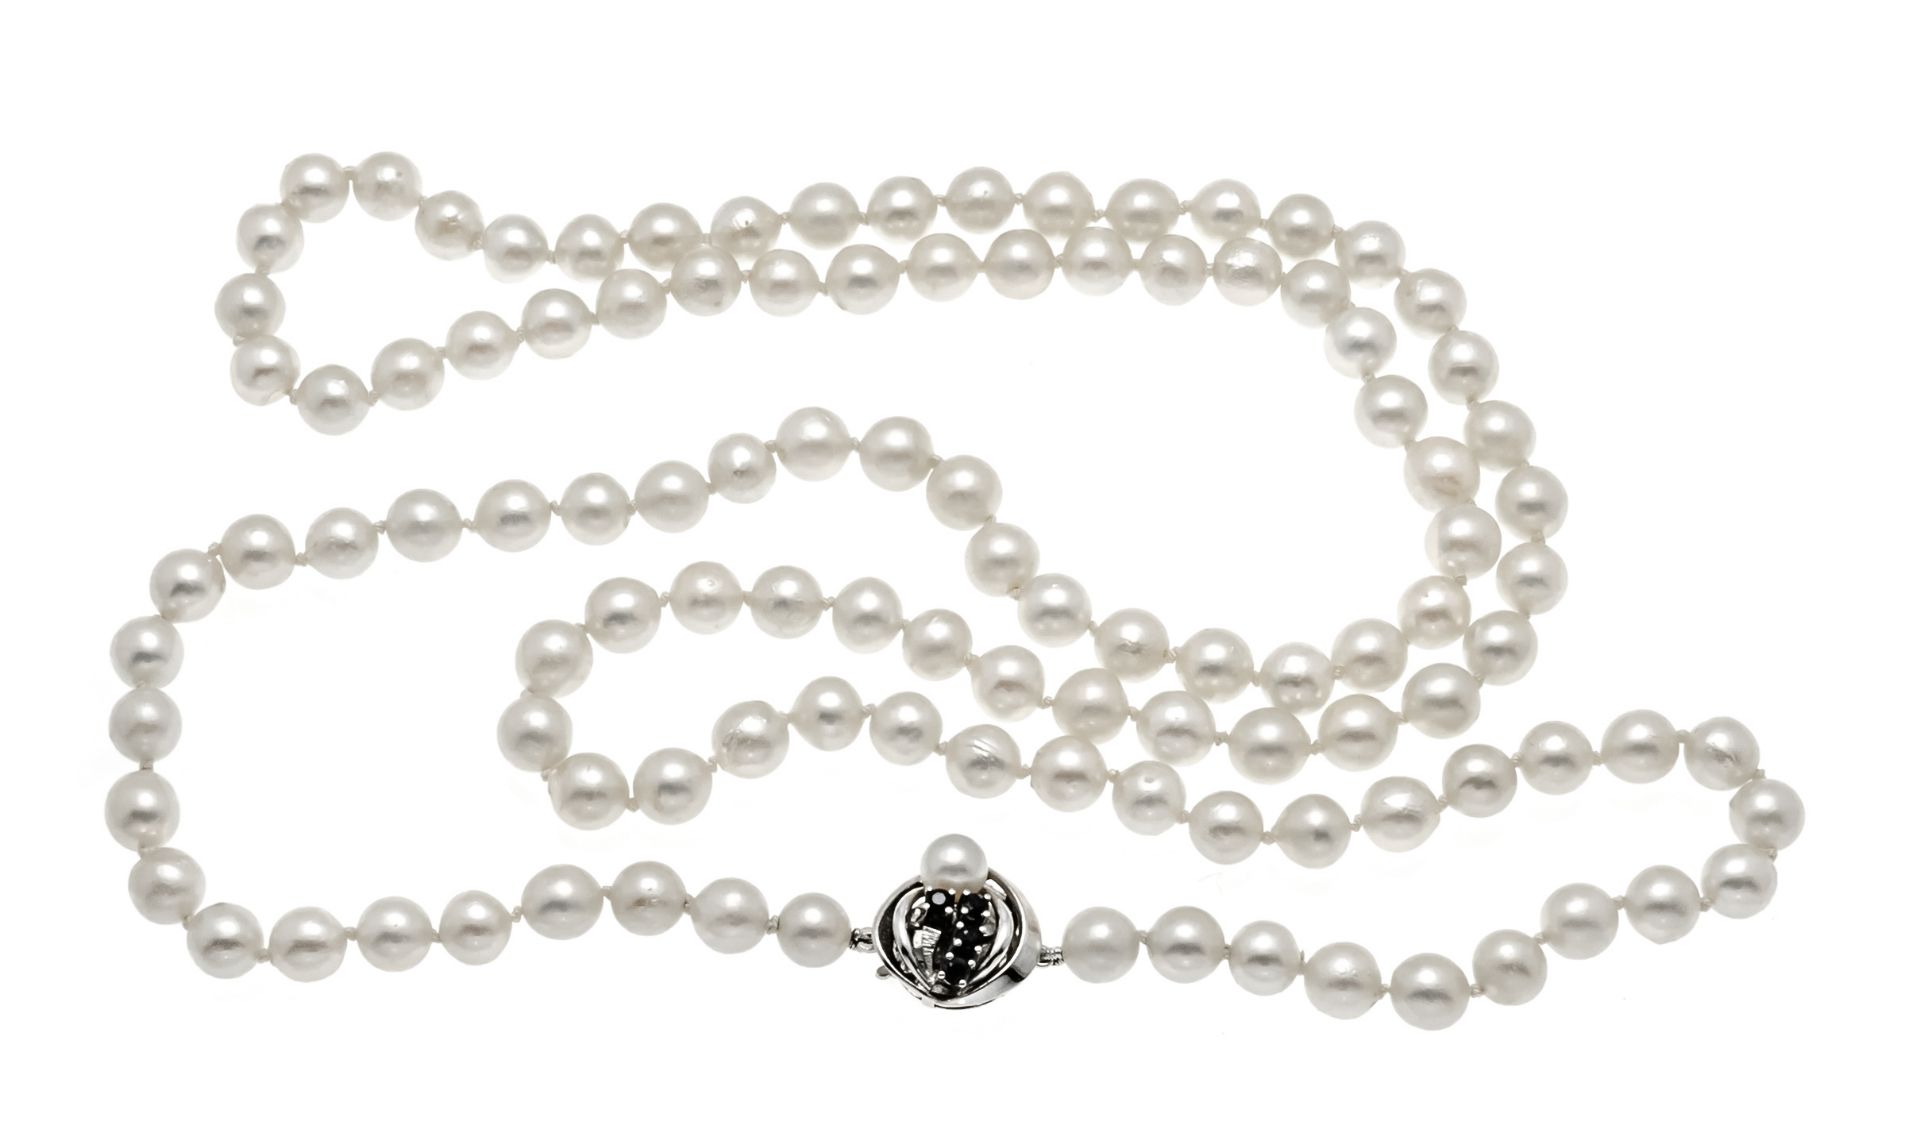 Akoya pearl necklace with pin clasp silver 835/000 set with a creamy white Akoya pearl 6 and 4 round